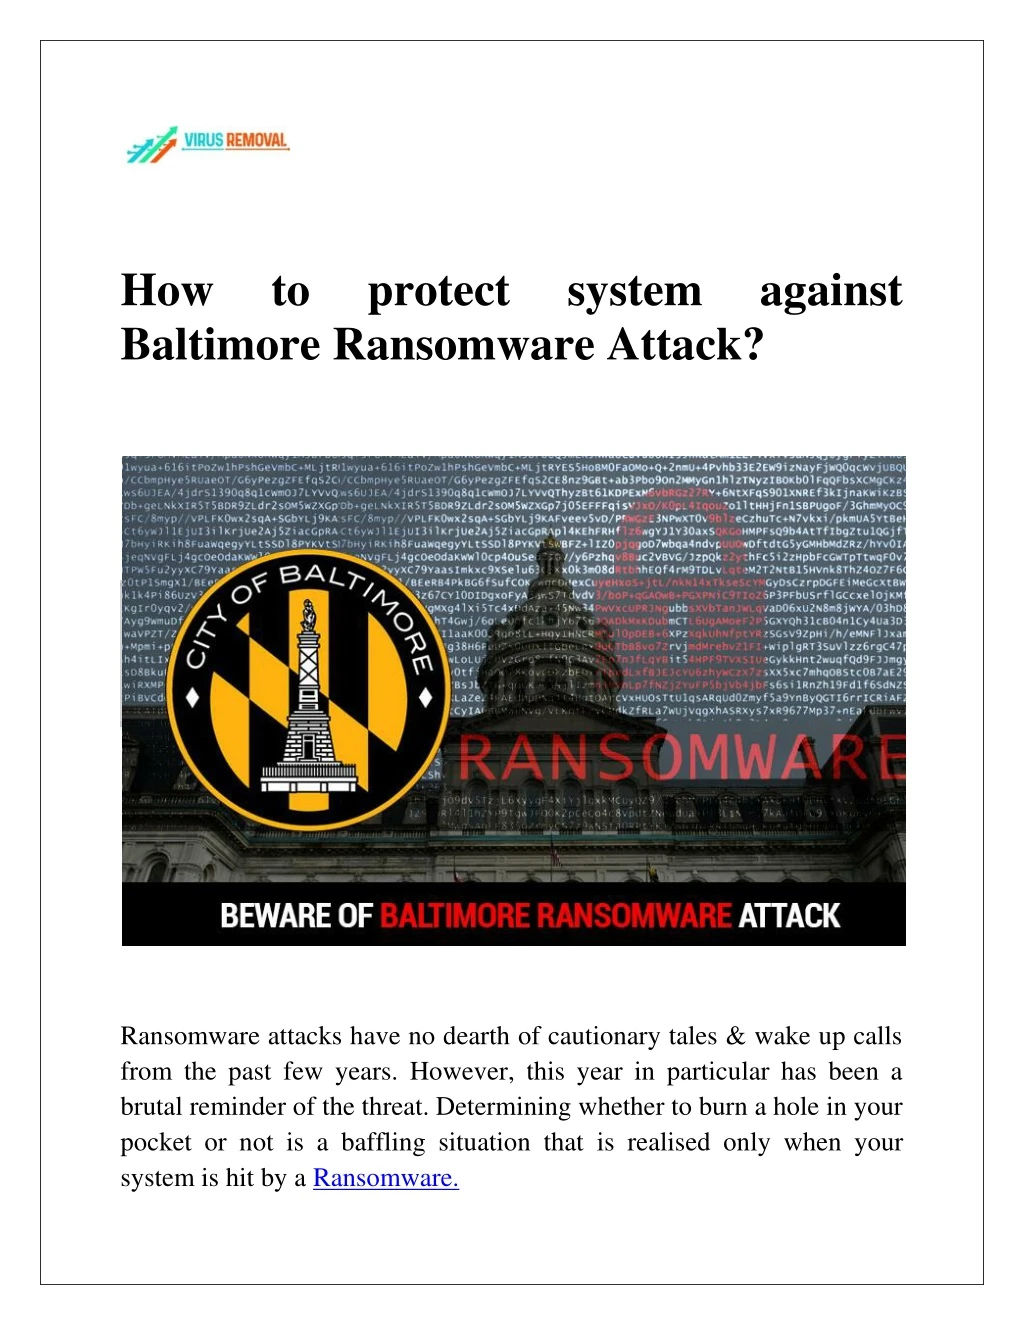 how baltimore ransomware attack